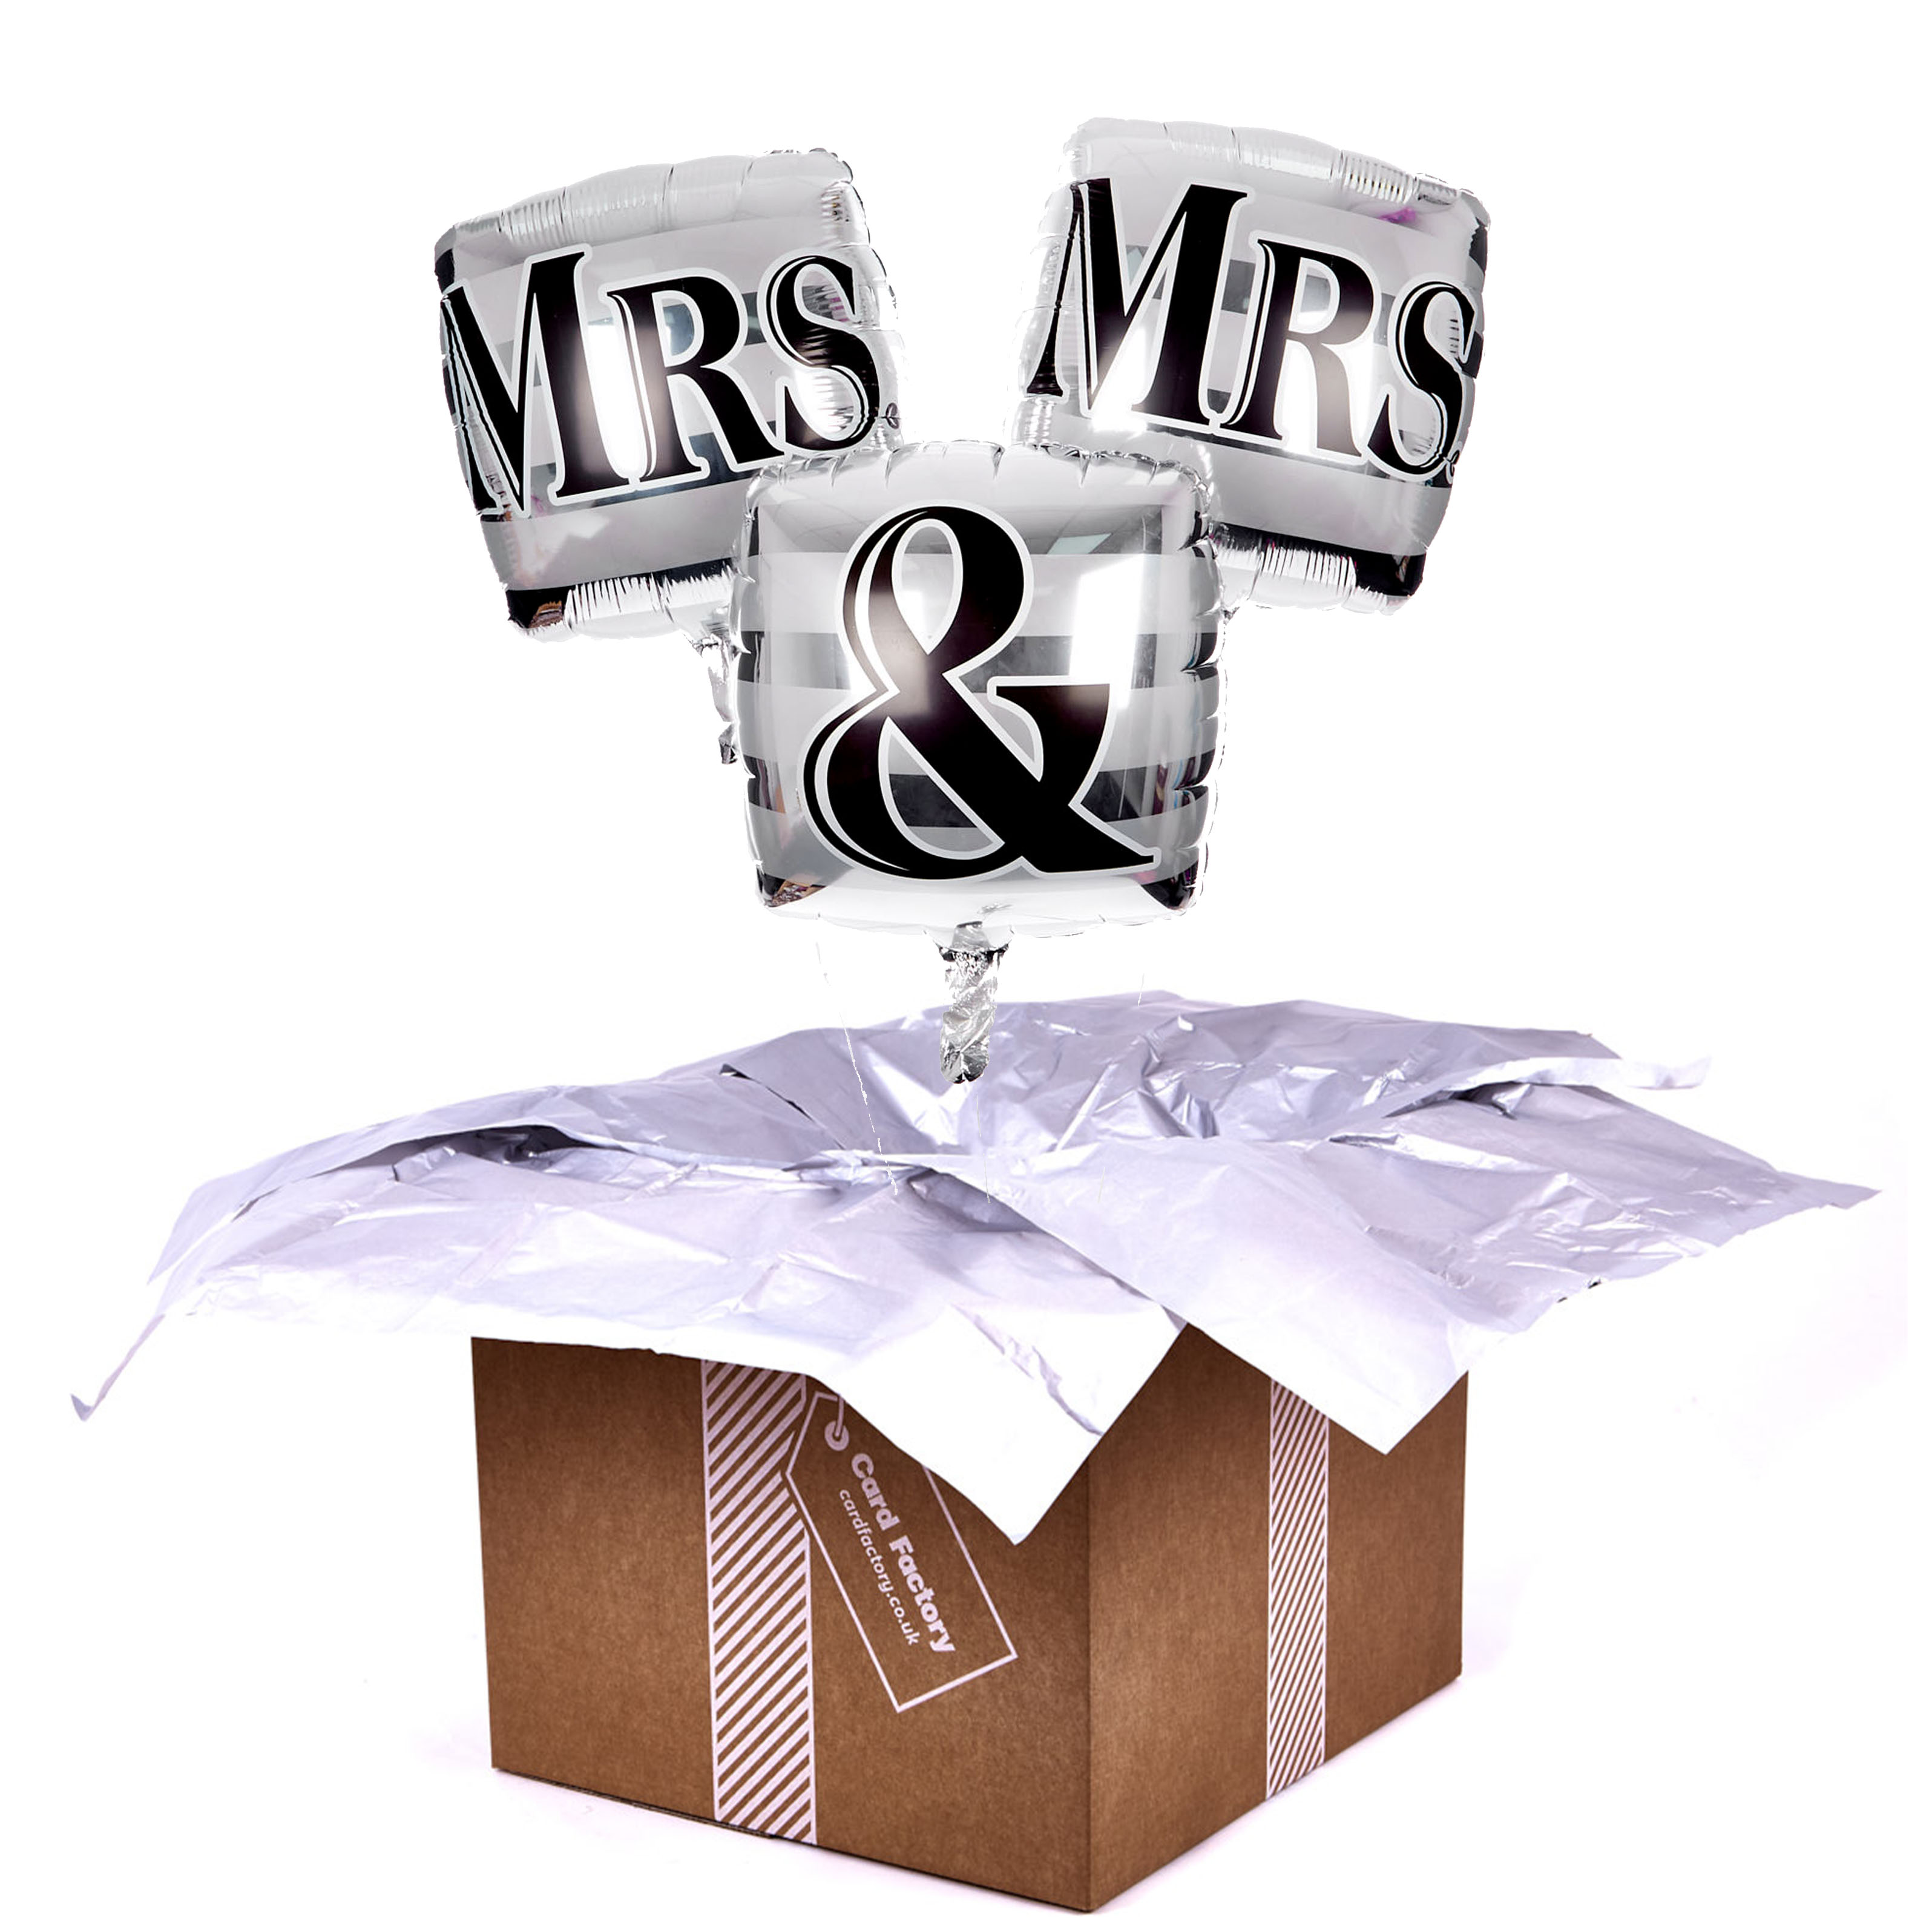 Square Mrs & Mrs Balloon Bouquet - DELIVERED INFLATED!